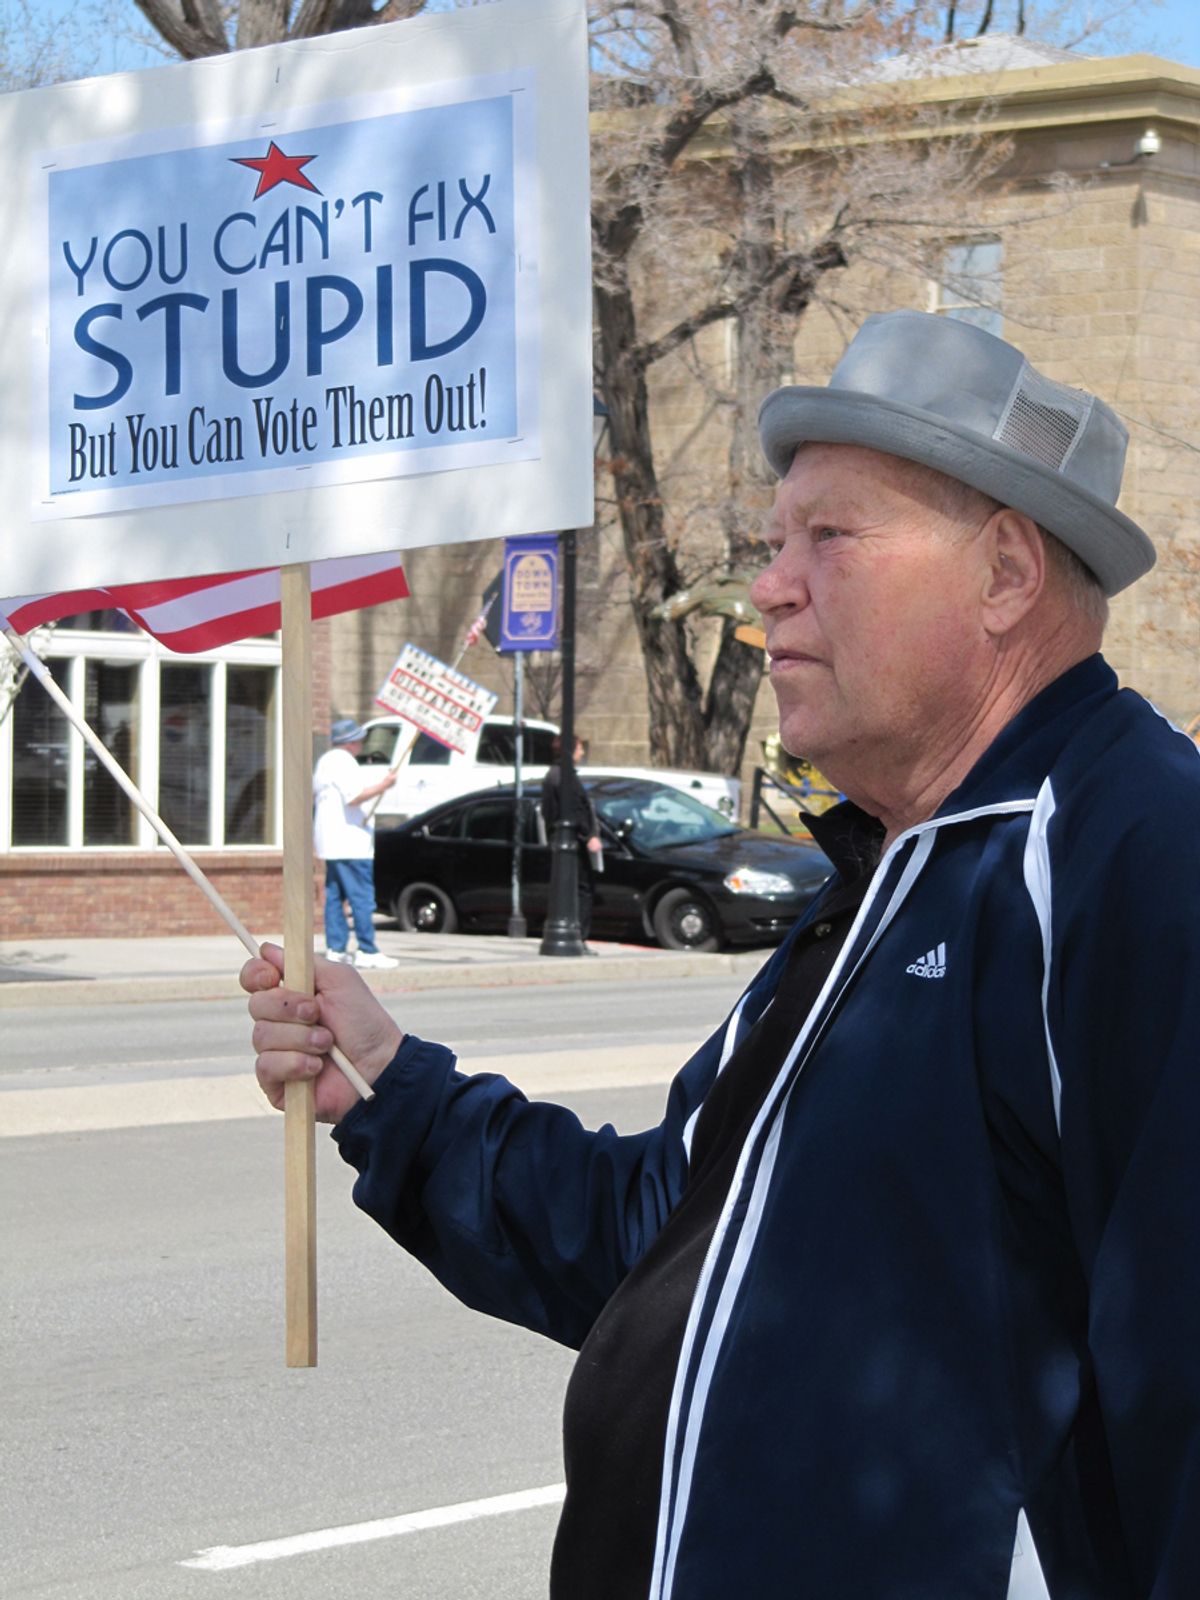 Warren Jensen holds a sign along  U.S. 395 during a tea party rally and tax protest on the Capitol grounds in Carson City, Nev., Thursday, April 15, 2010. The 73-year-old Jensen says he's new to political activism, but became involved because he's angry over government.  (AP Photo/Sandra Chereb)    (Sandra Chereb)